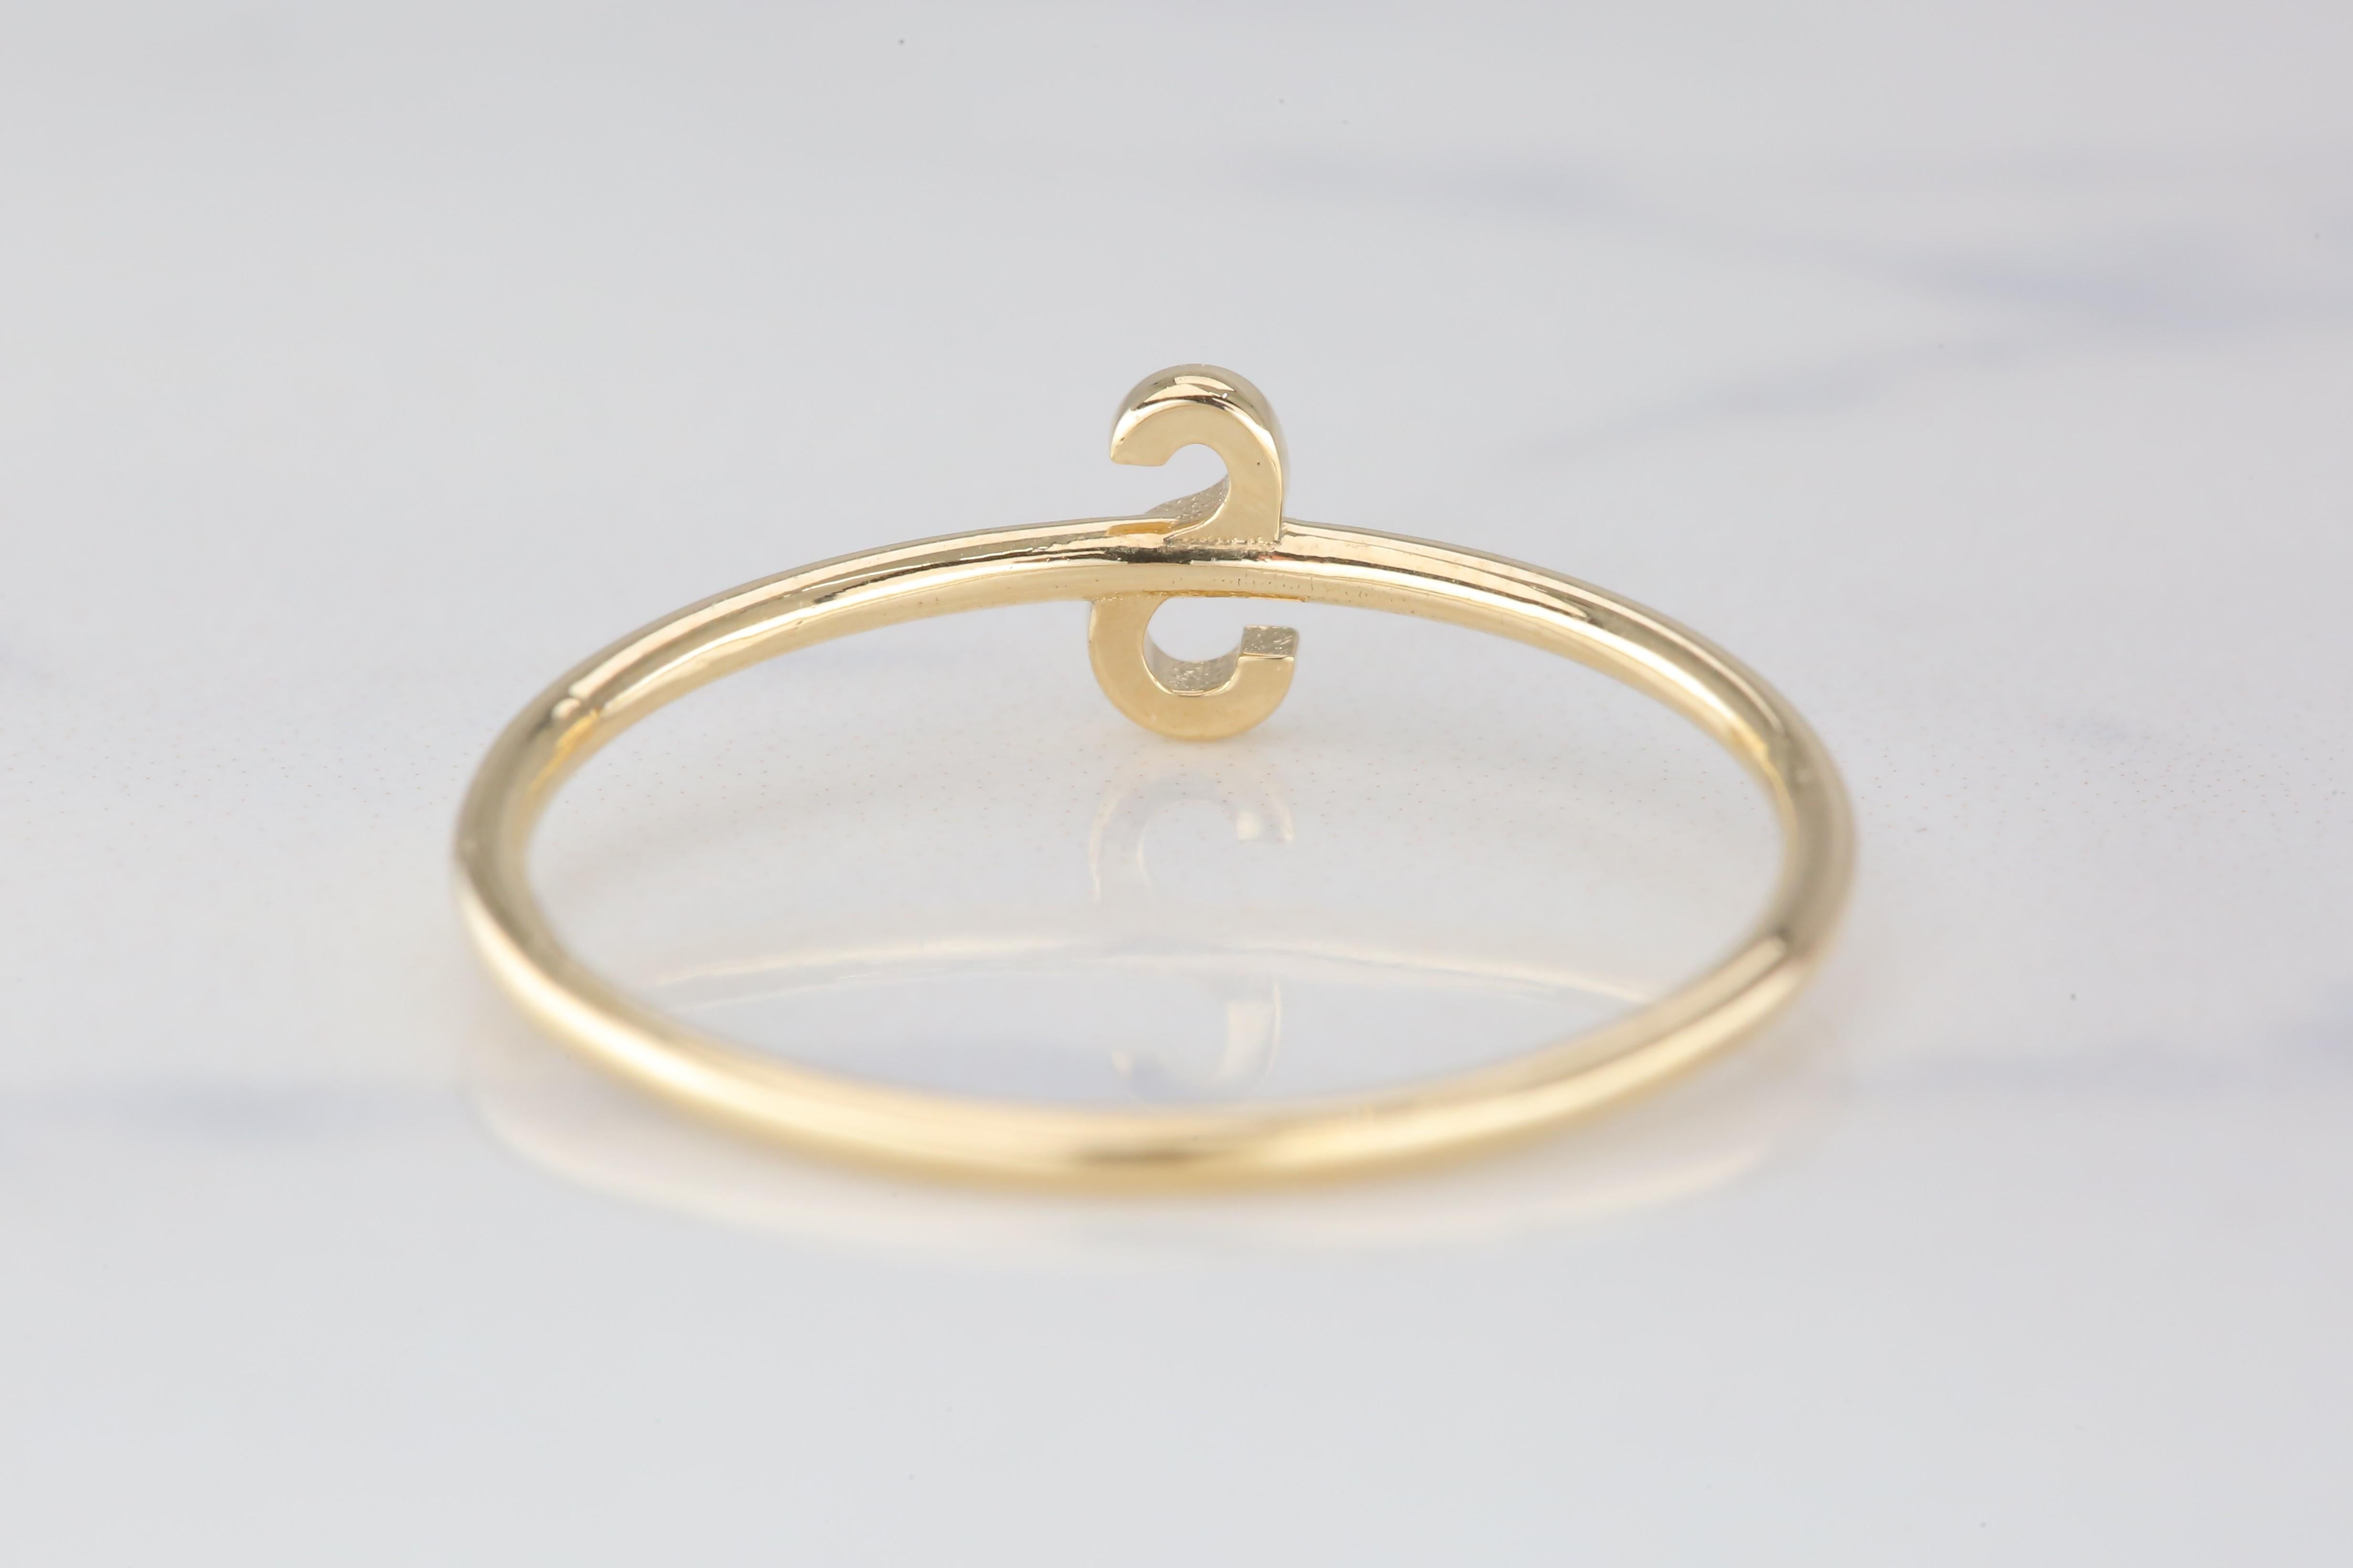 For Sale:  14K Gold Initial S Letter Ring, Personalized Initial Letter Ring 5